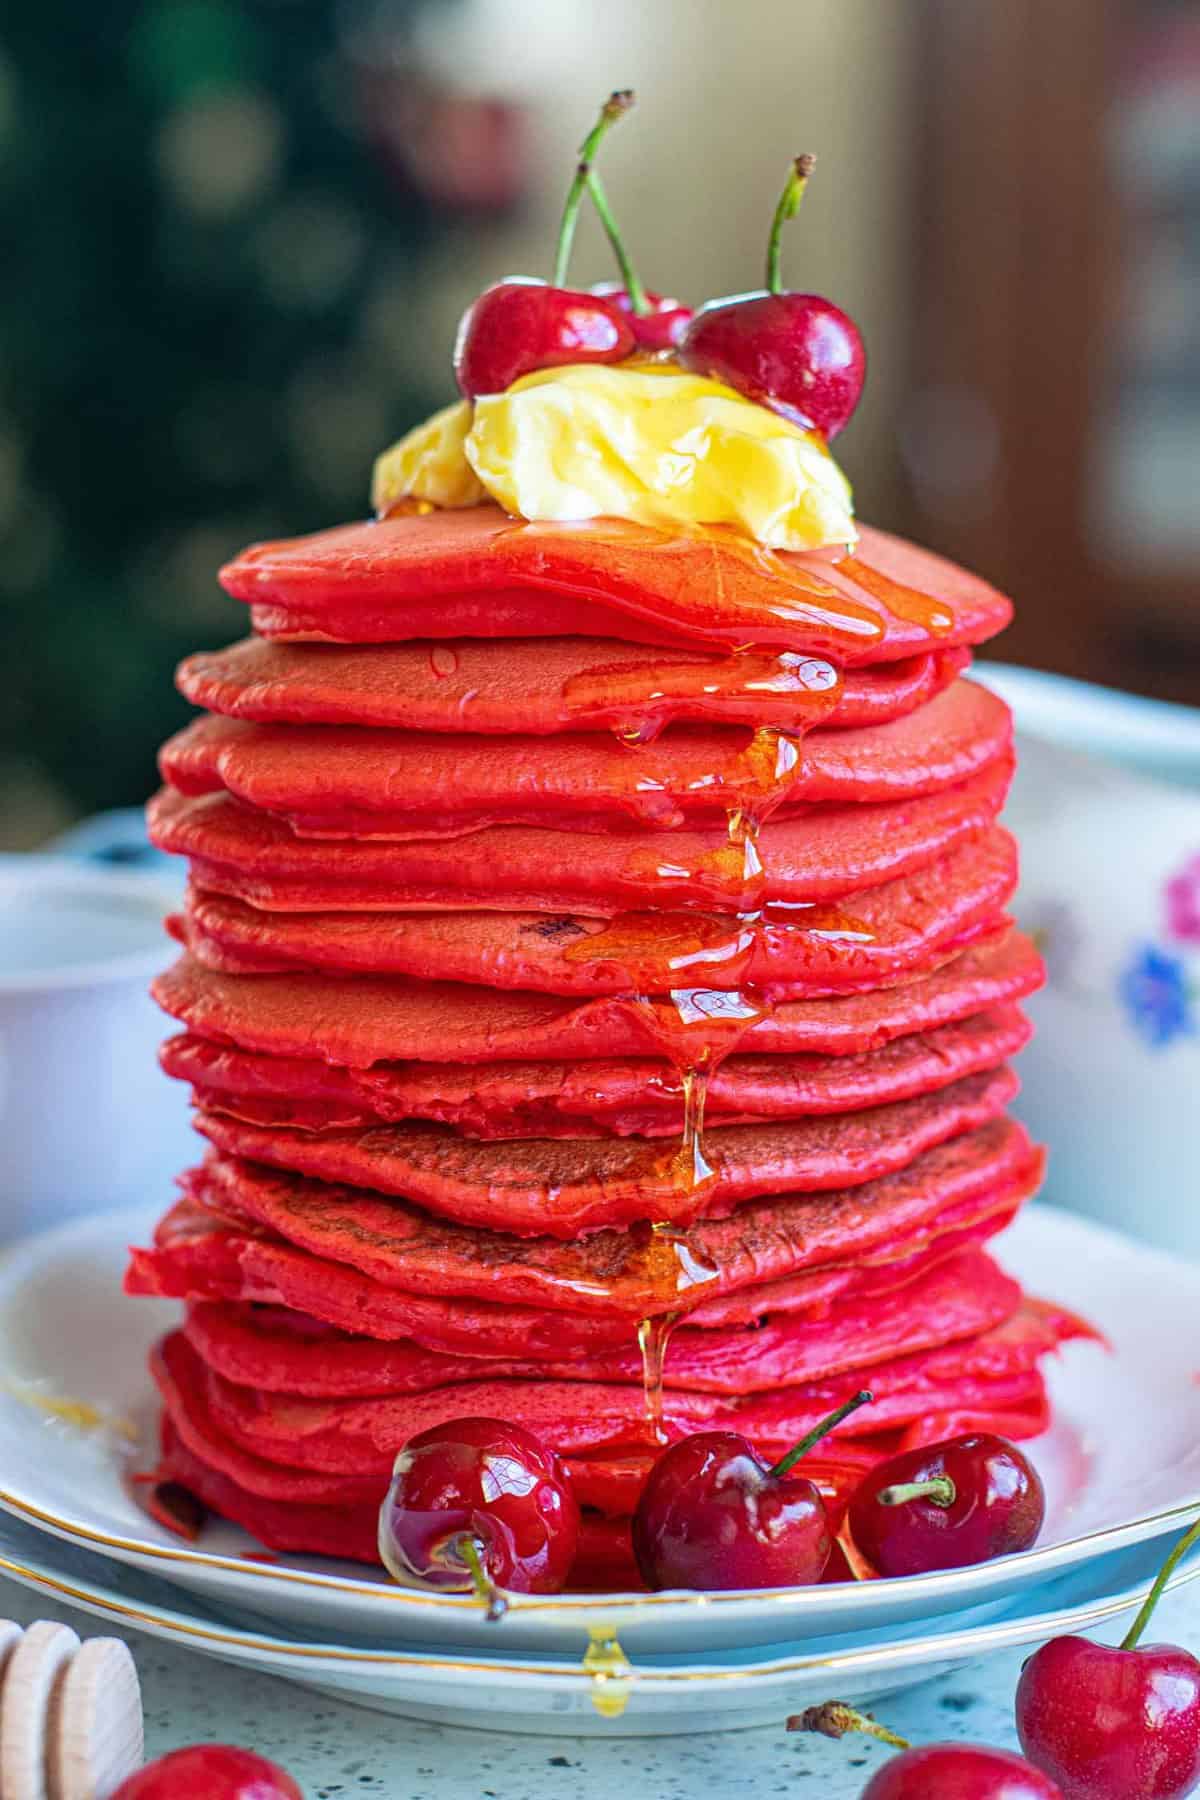 Tall stack of red velvet pancakes topped with cherries and butter.